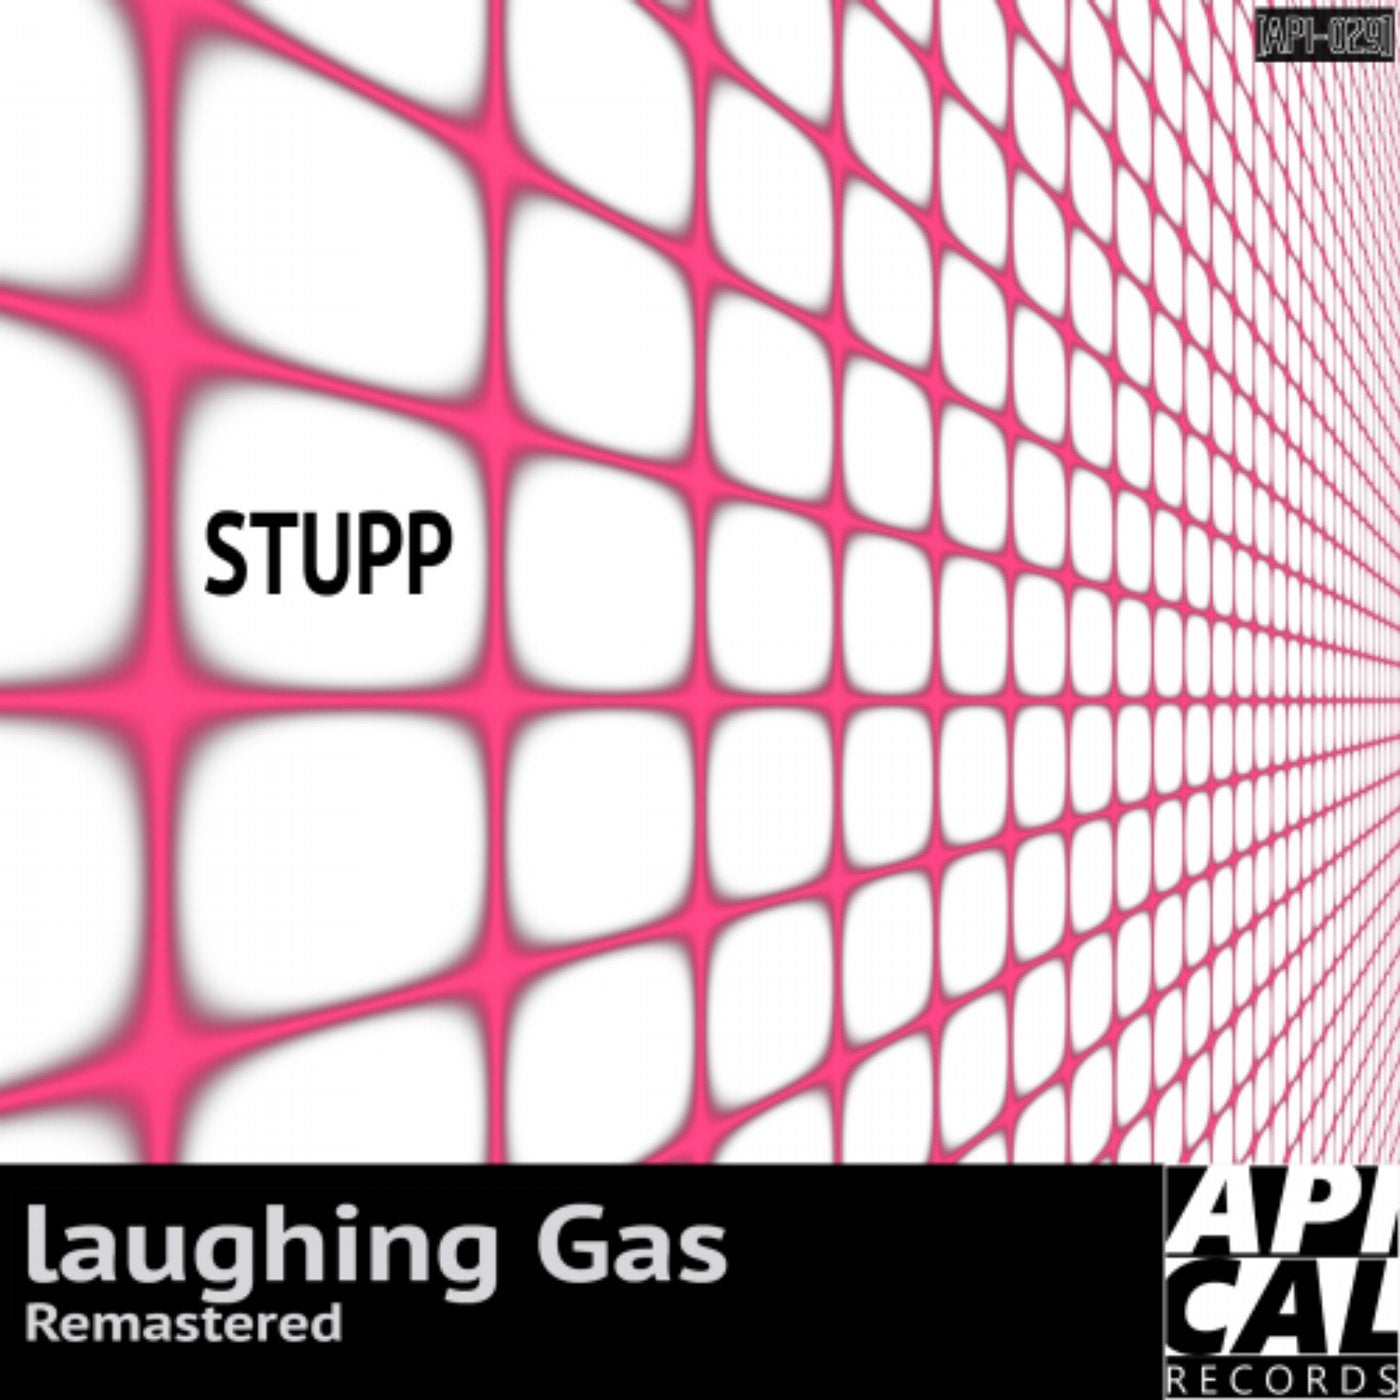 Laughing Gas Remastered